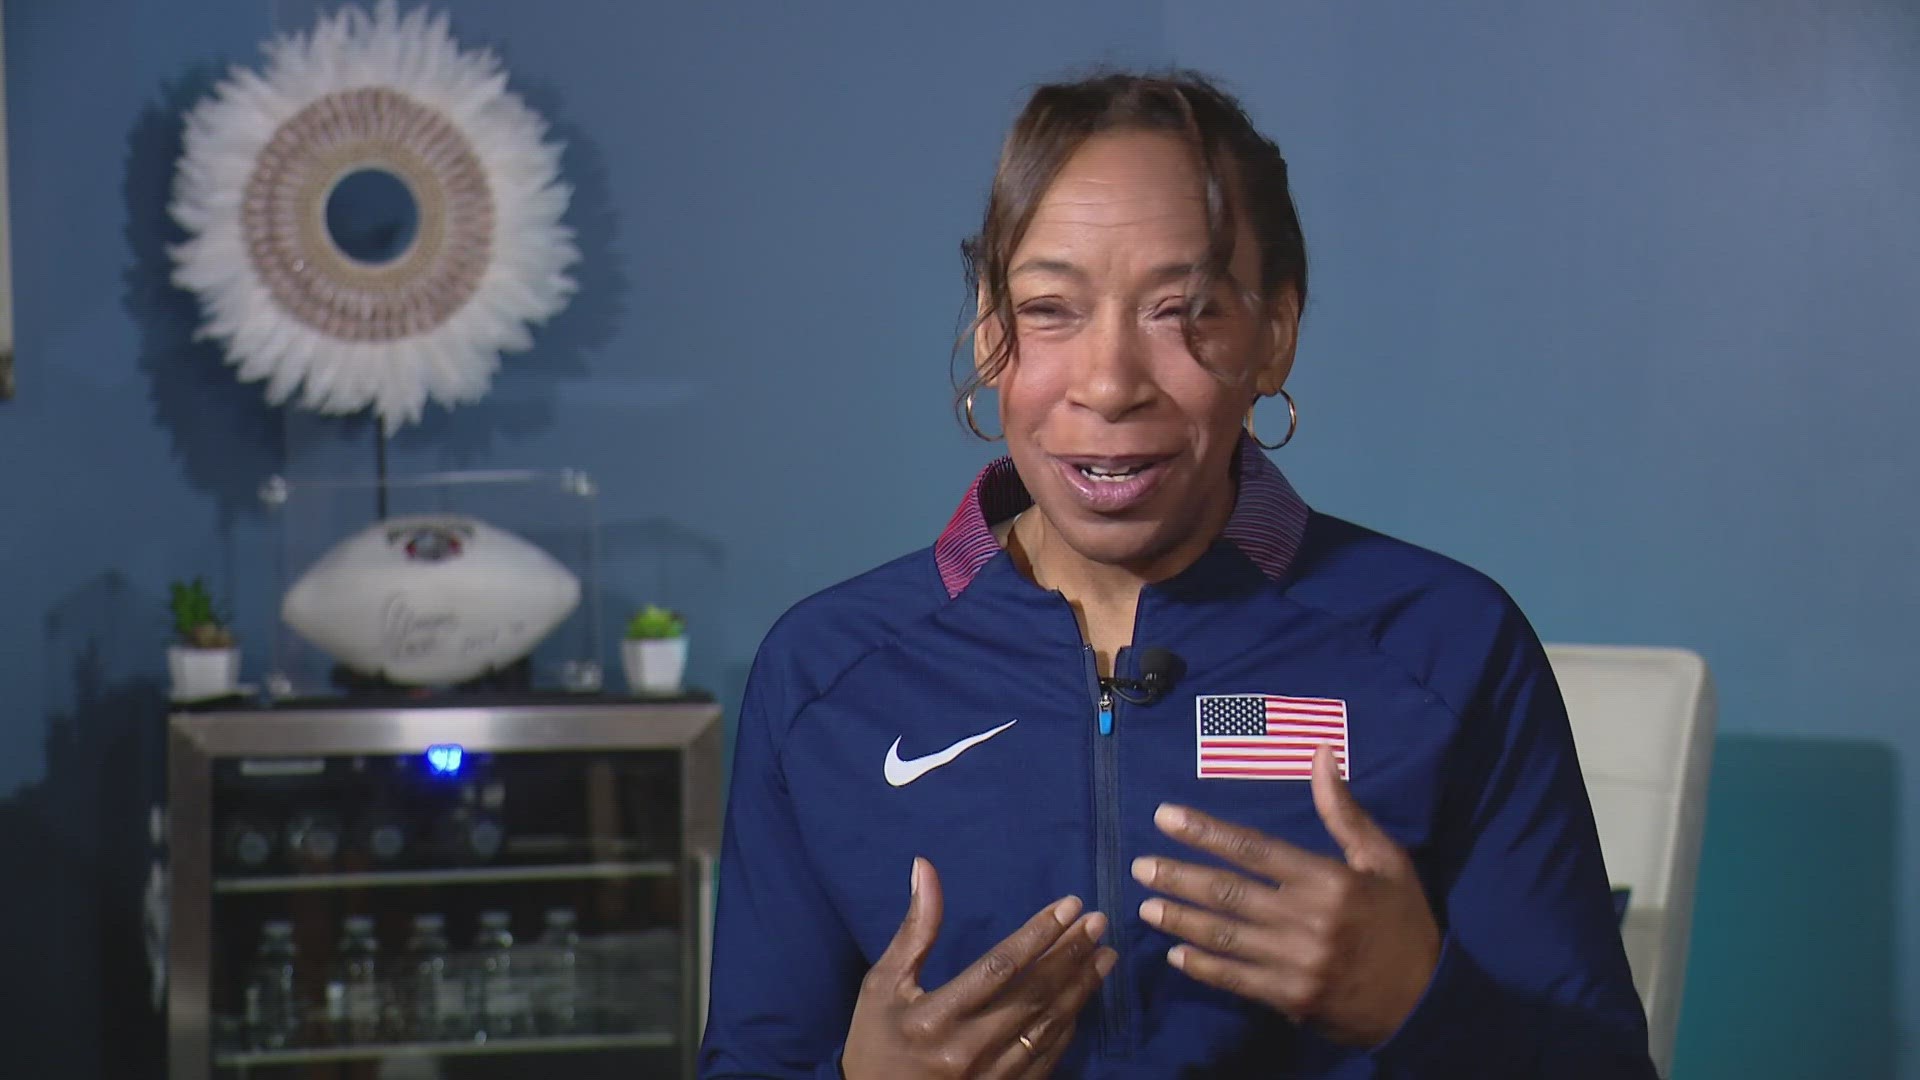 Local sports medicine chiropractor Dr. Connie Hayes will take her experience overseas to treat athletes on Team USA Track and Field. This will be her first Olympics.